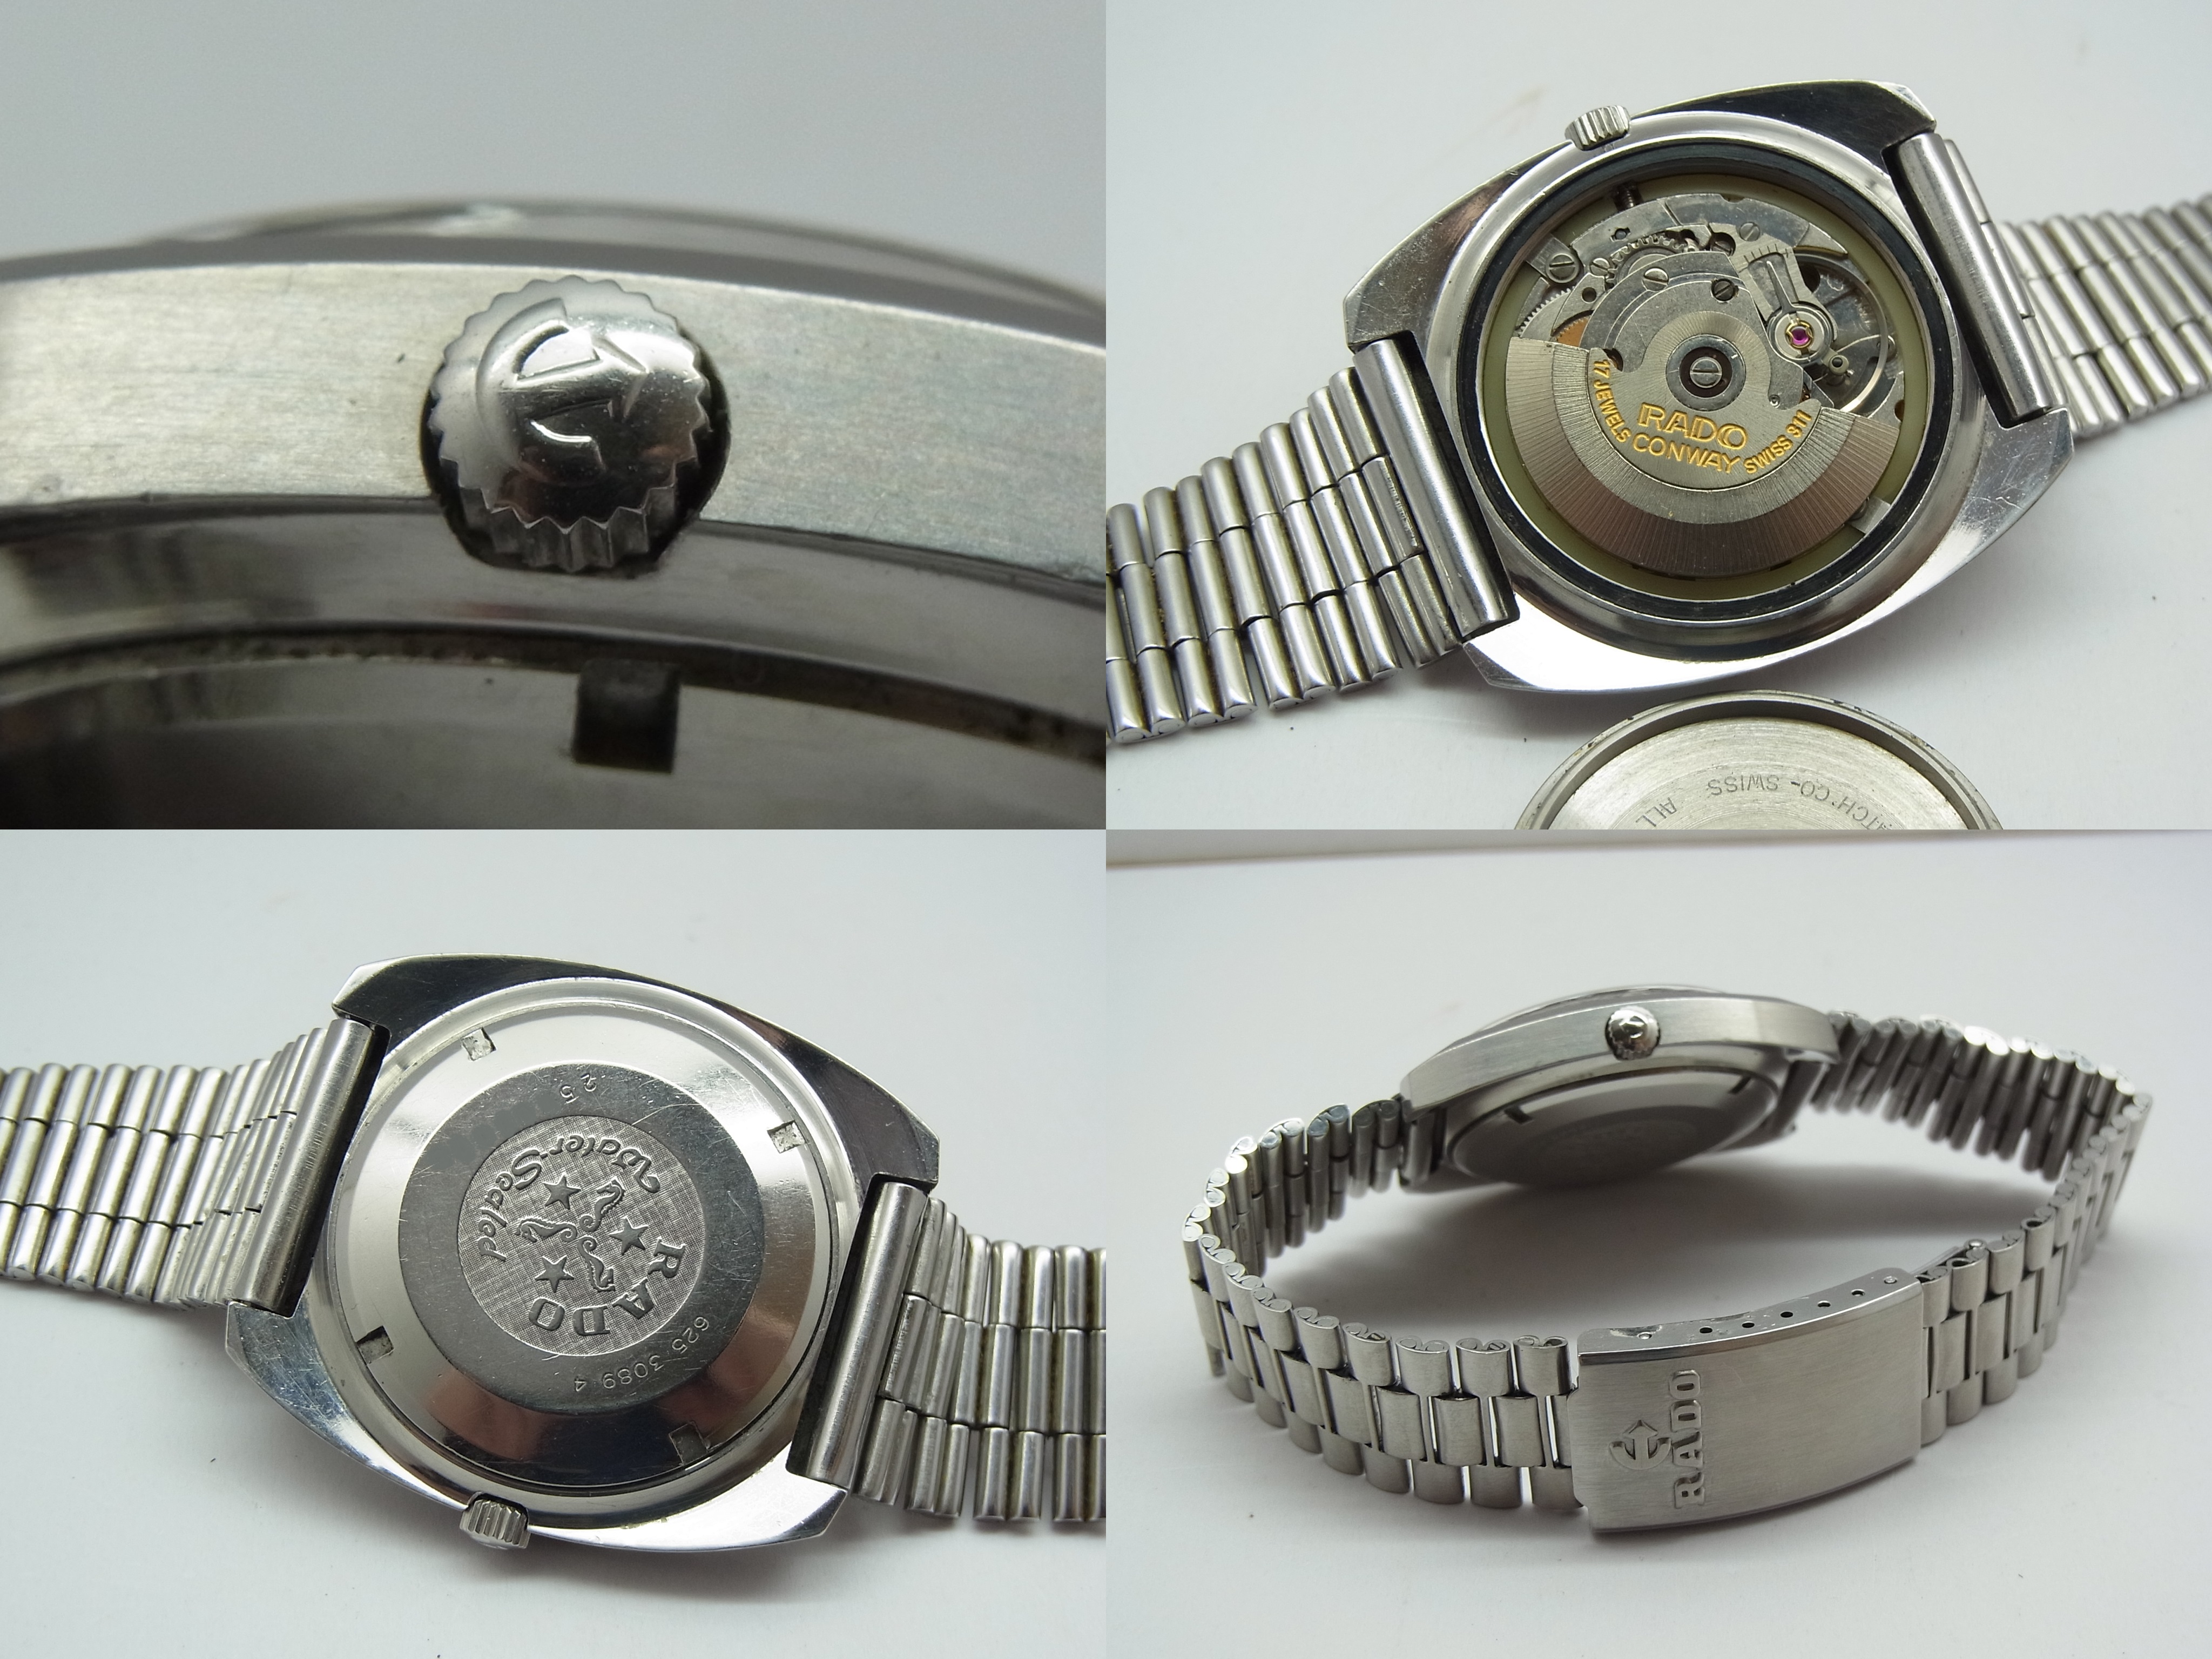 Antique Watch Bar: RADO CONWAY 10 17 JEWELS AUTOMATIC WATCH 70 (SOLD)